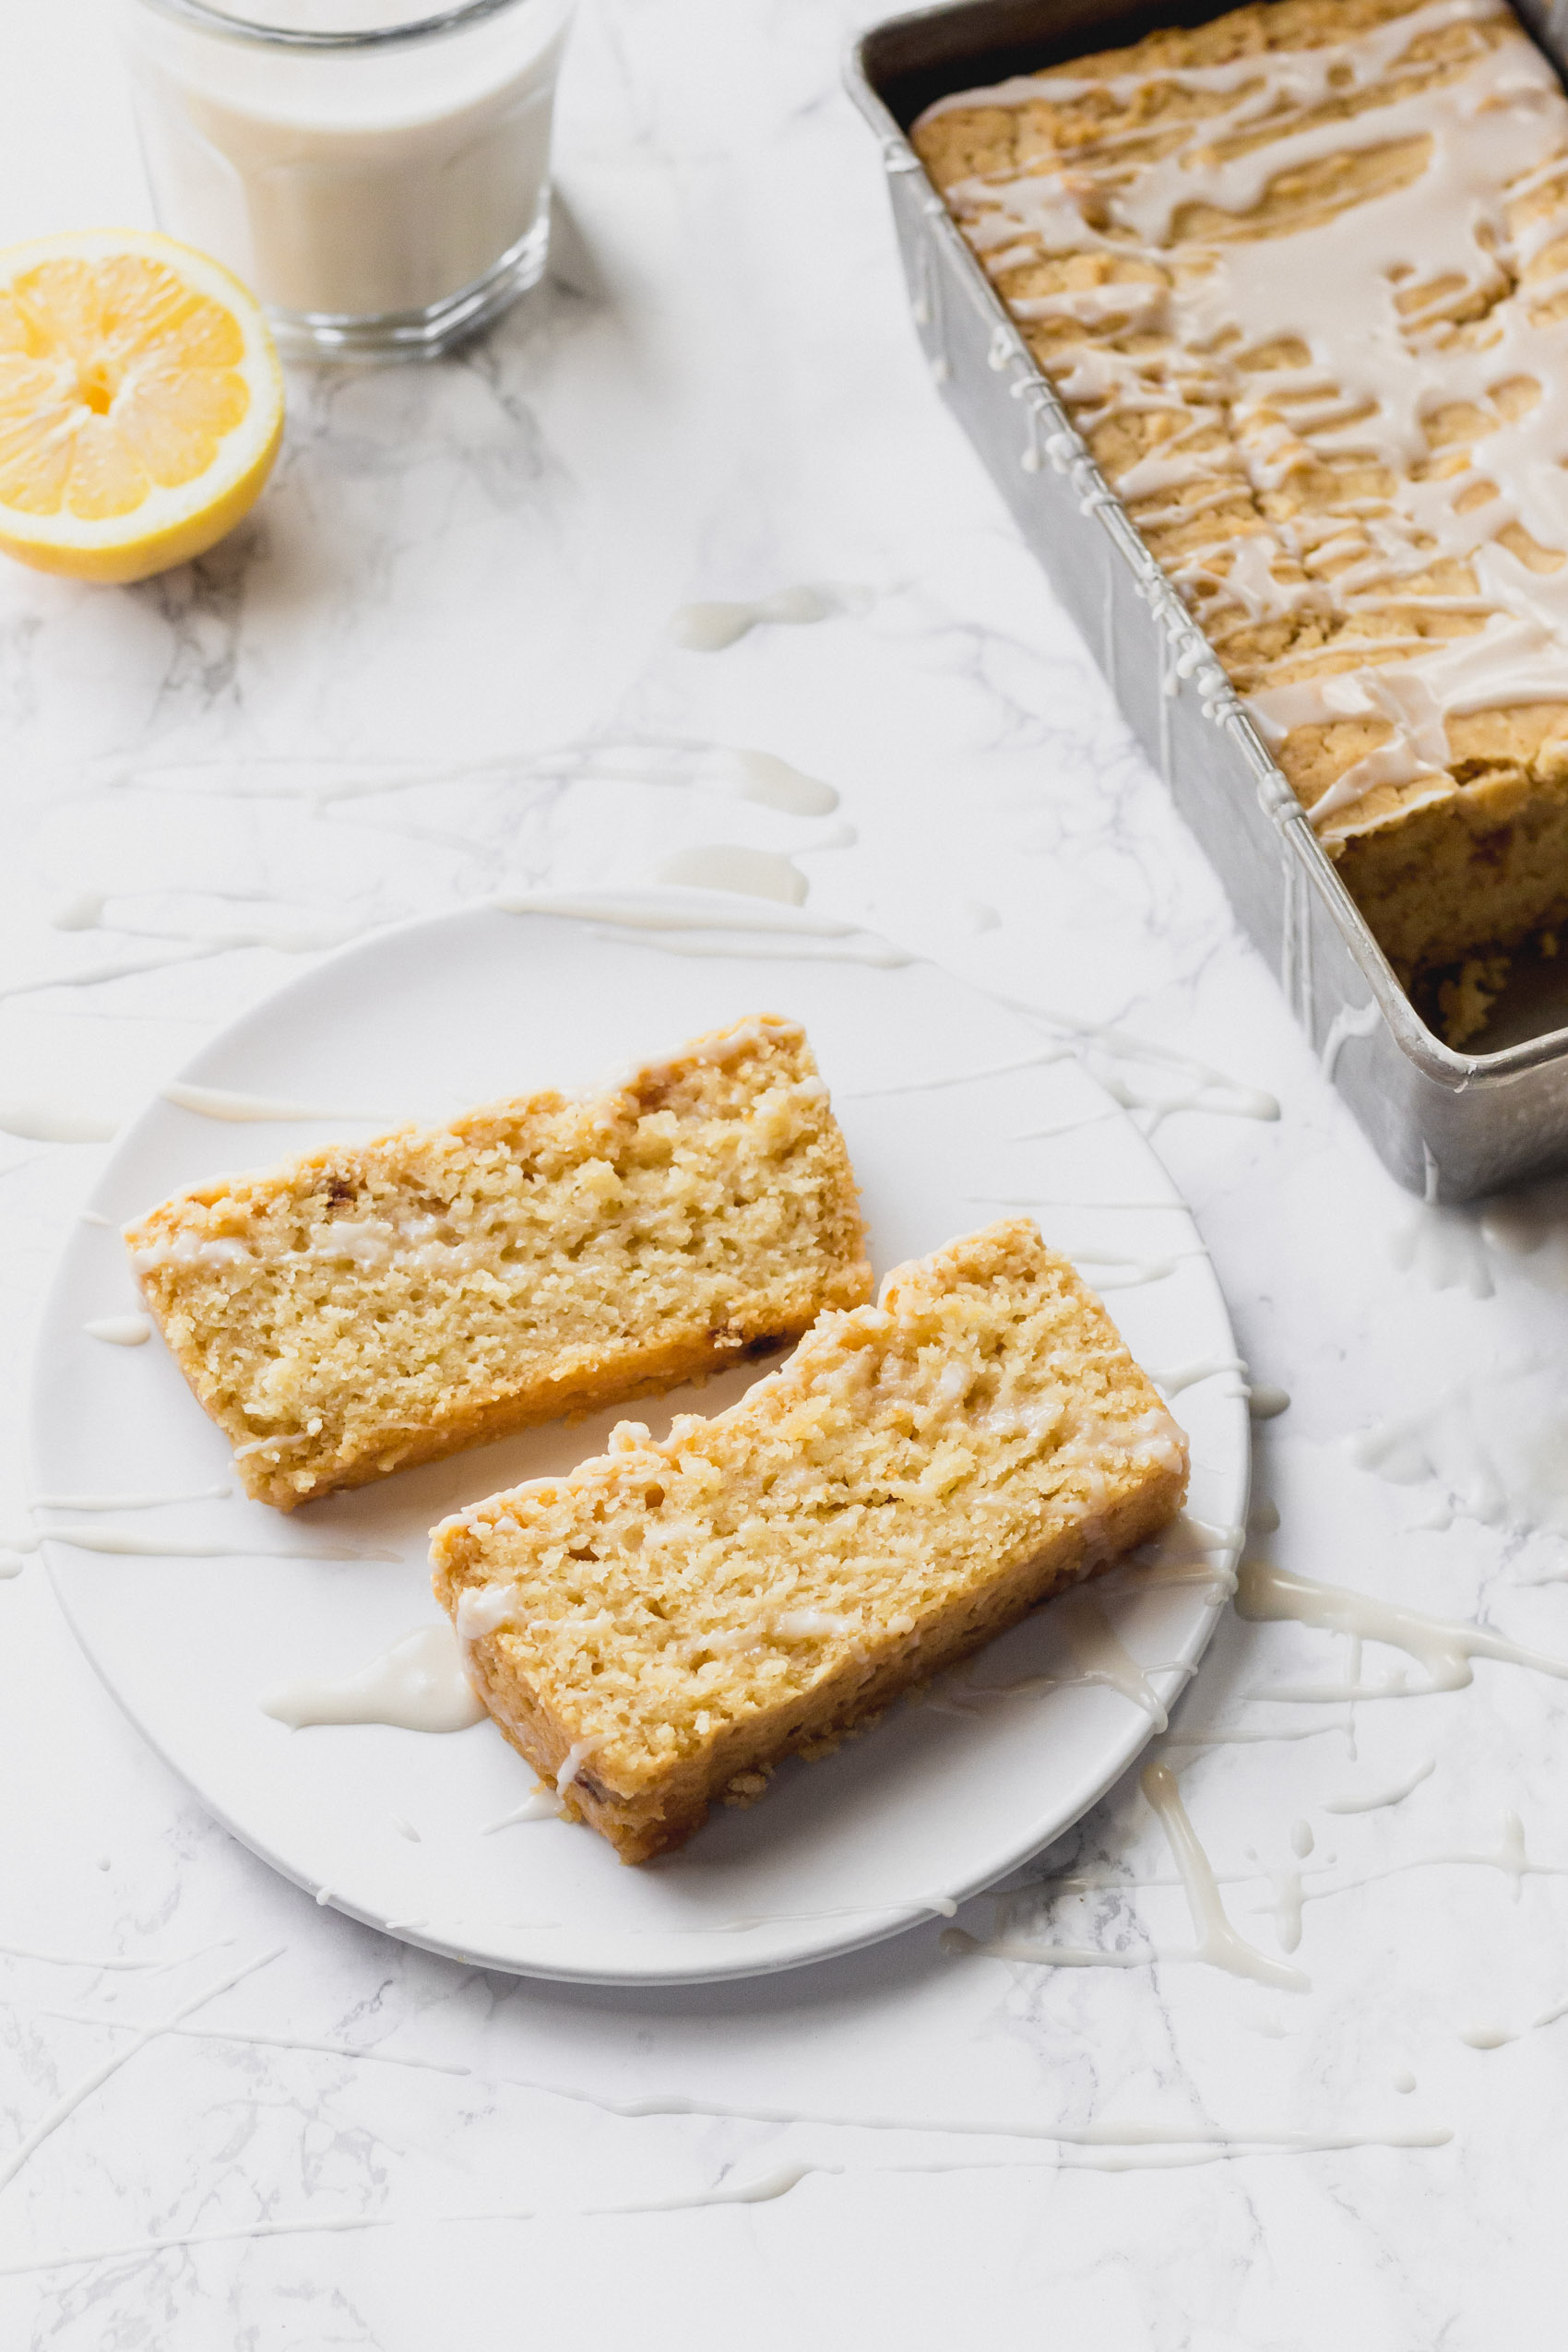 two servings of lemon cake resting on a plate next to the tin holding the full loaf